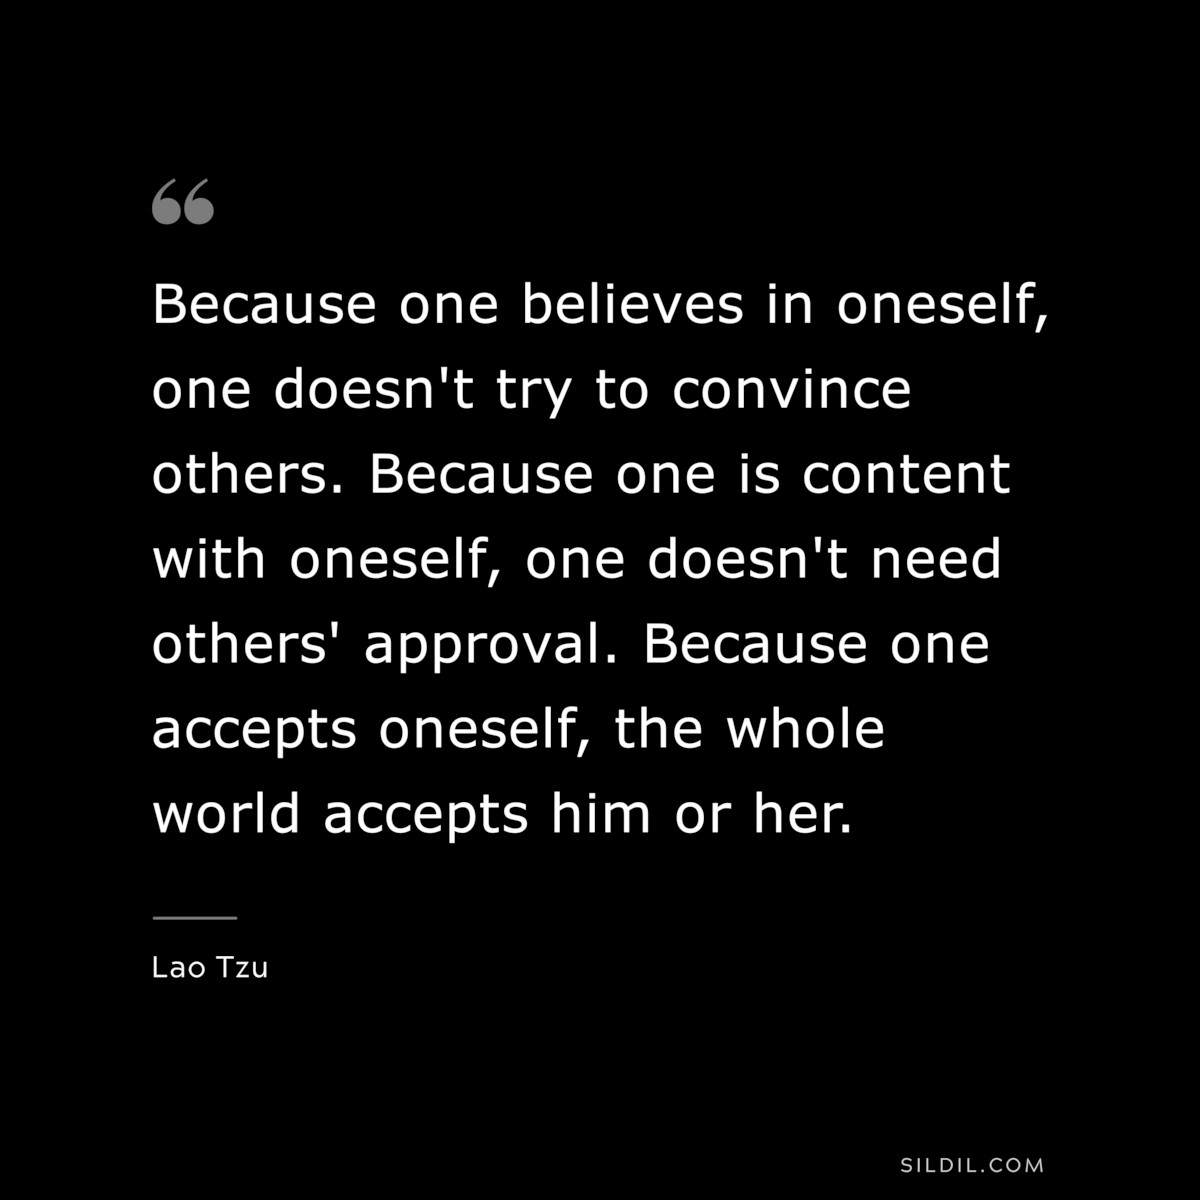 Because one believes in oneself, one doesn't try to convince others. Because one is content with oneself, one doesn't need others' approval. Because one accepts oneself, the whole world accepts him or her. ― Lao Tzu